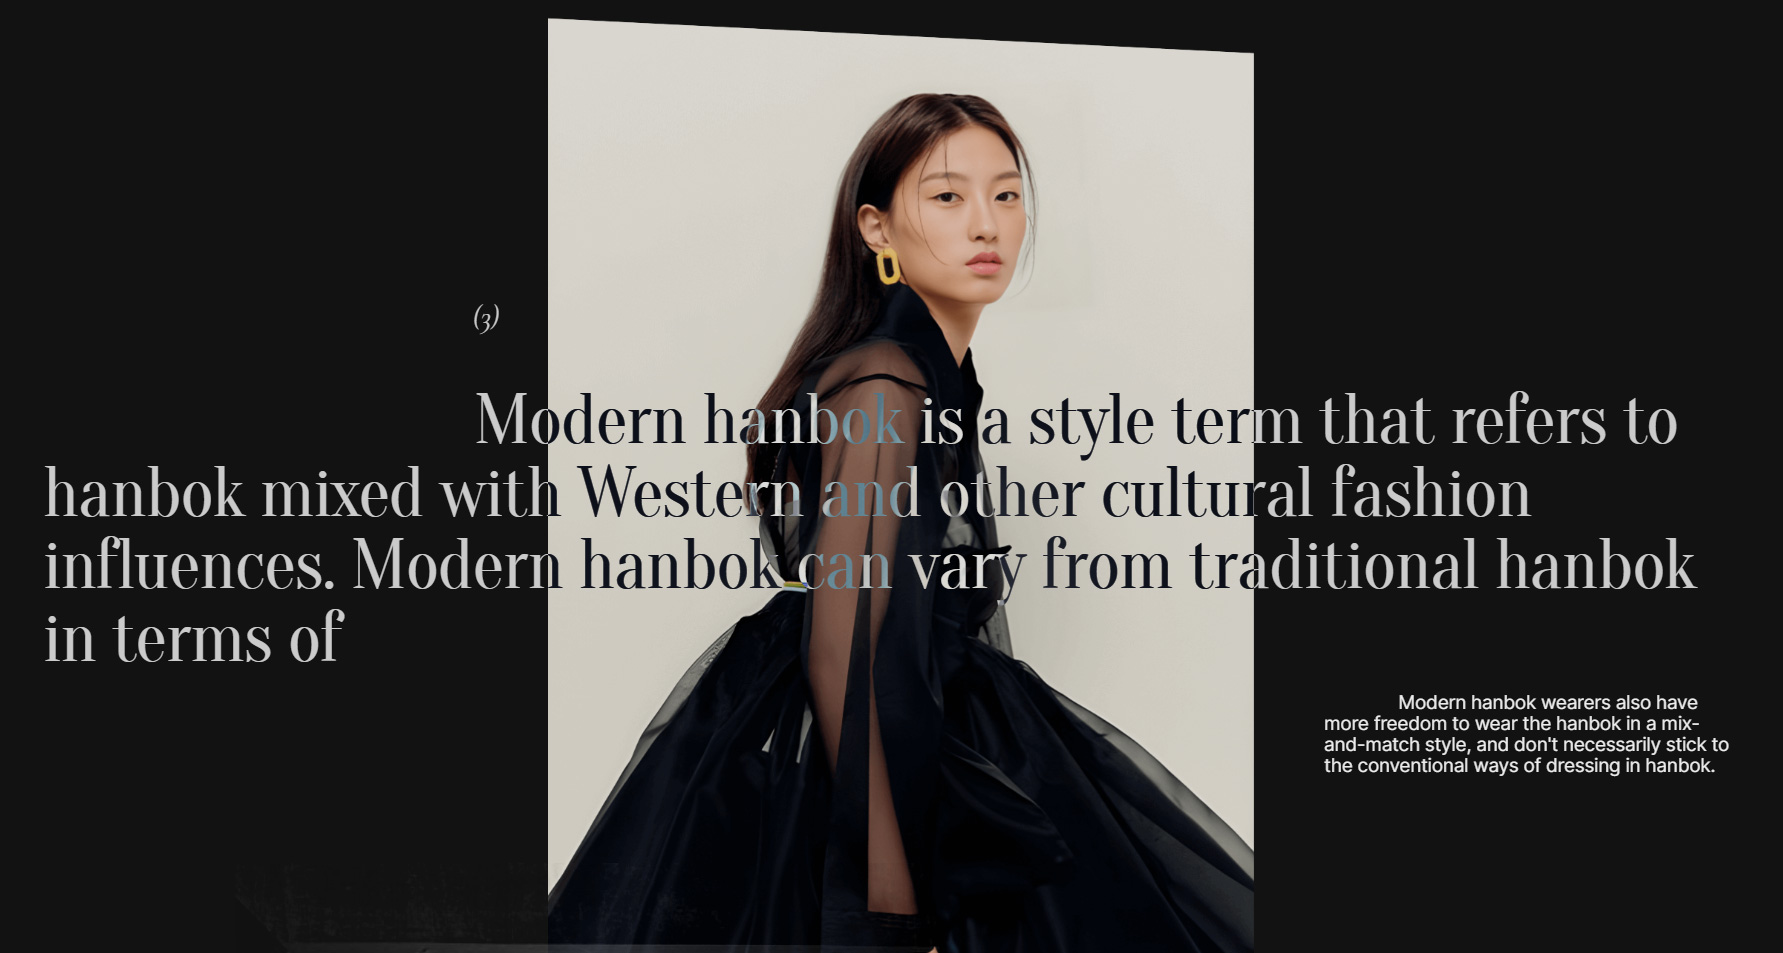 Hanbok - Website of the Day